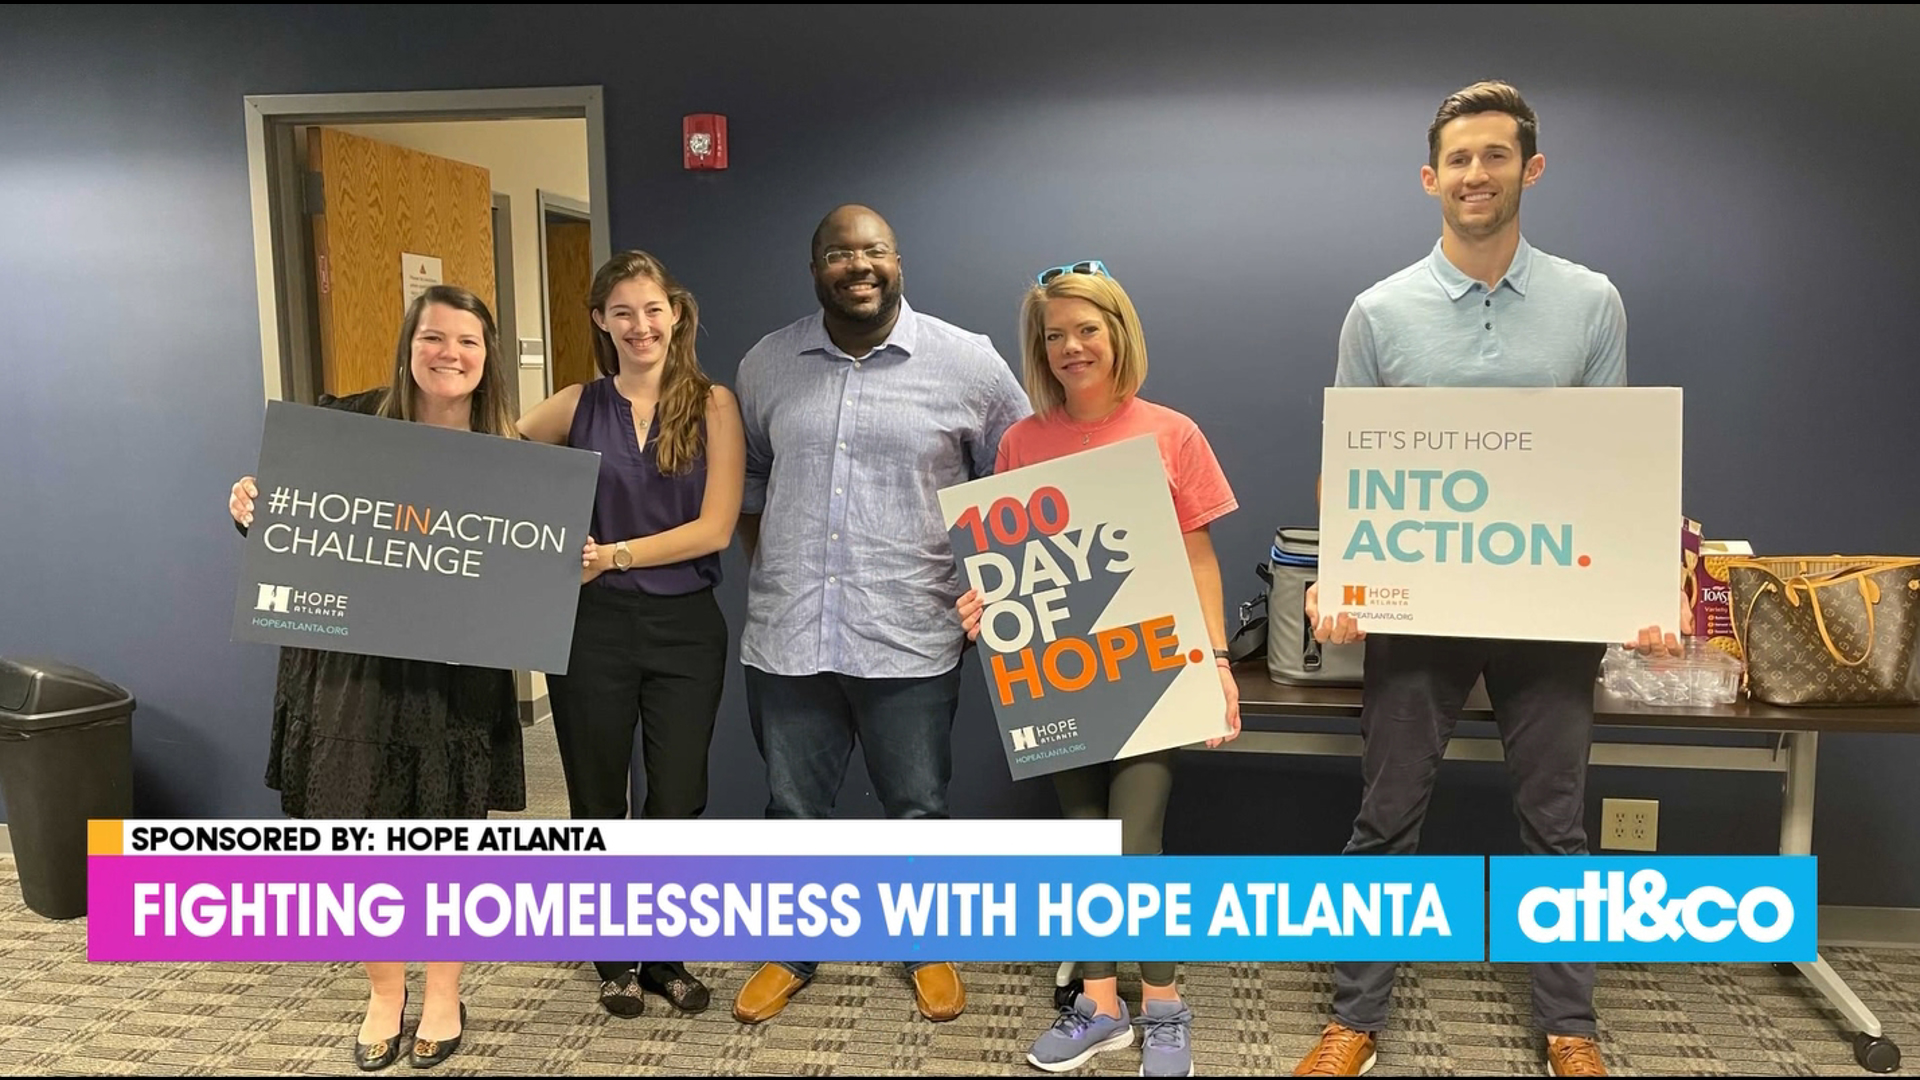 HOPE Atlanta is the Metro's most established agency dedicated to fighting homelessness. See how you can get involved and put hope into action!